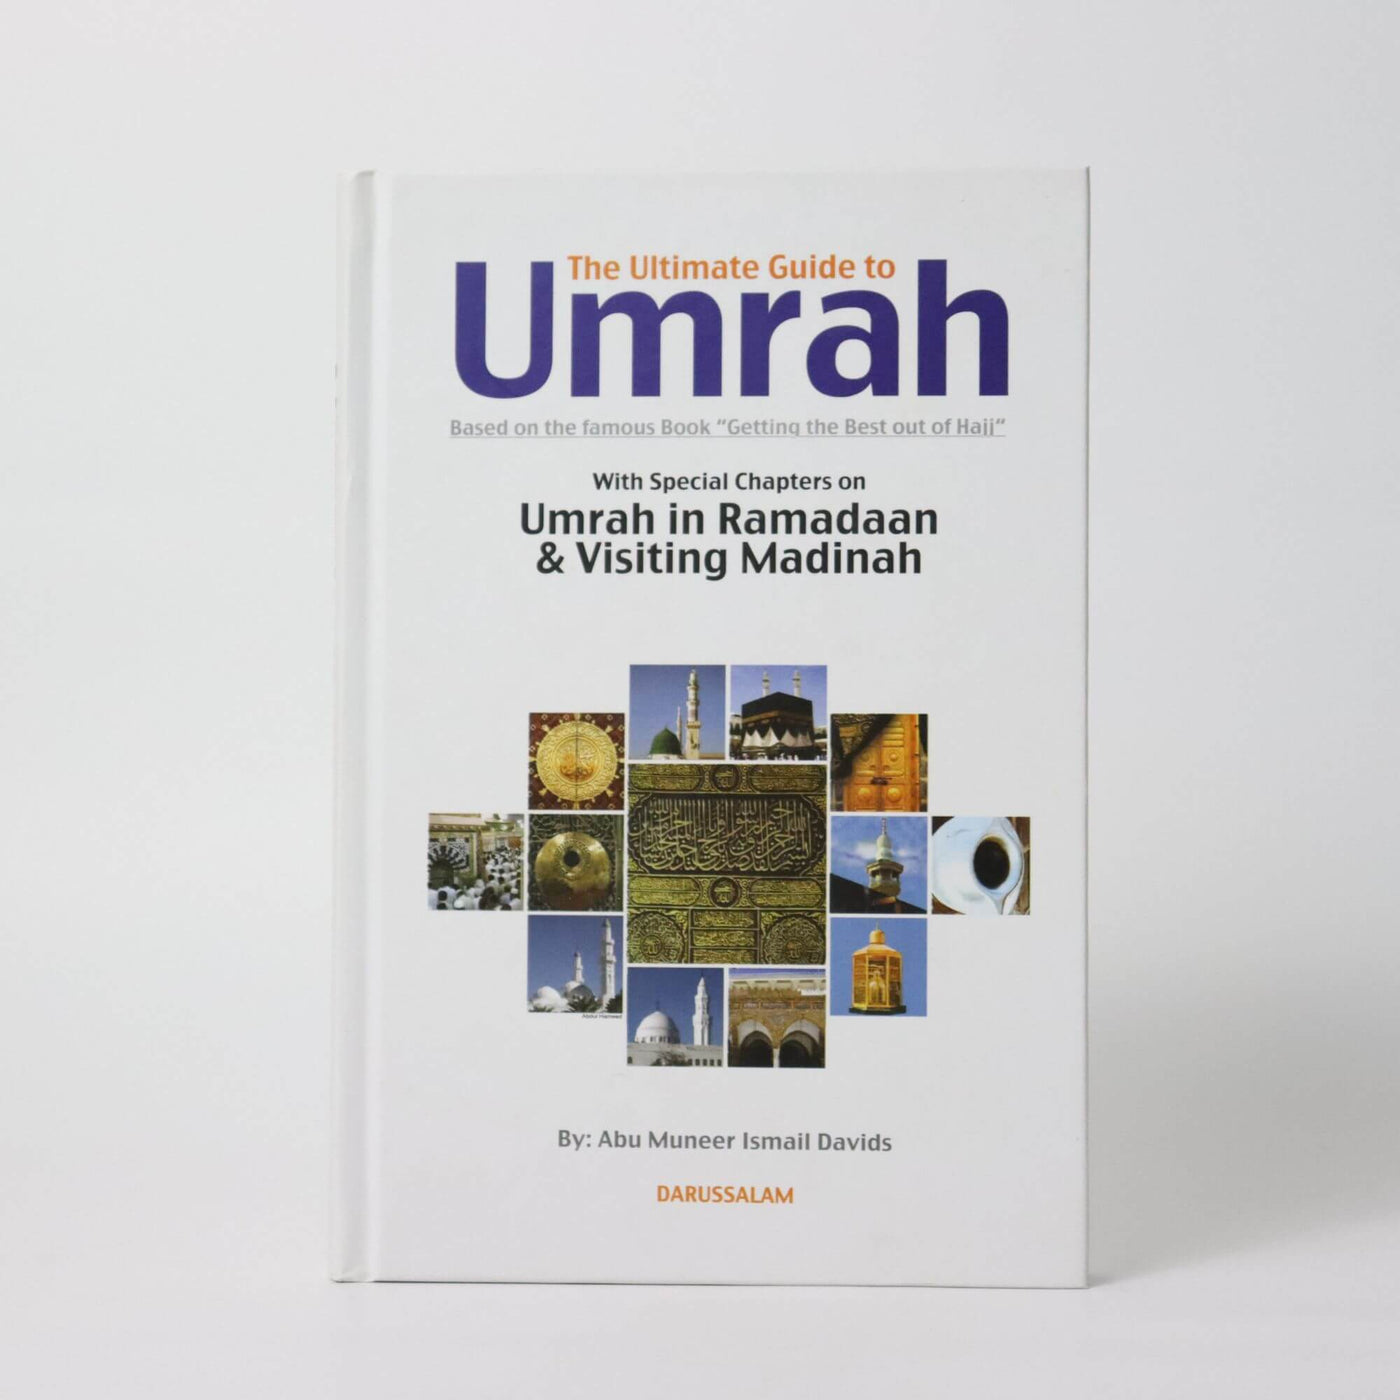 The Ultimate Guide To Umrah